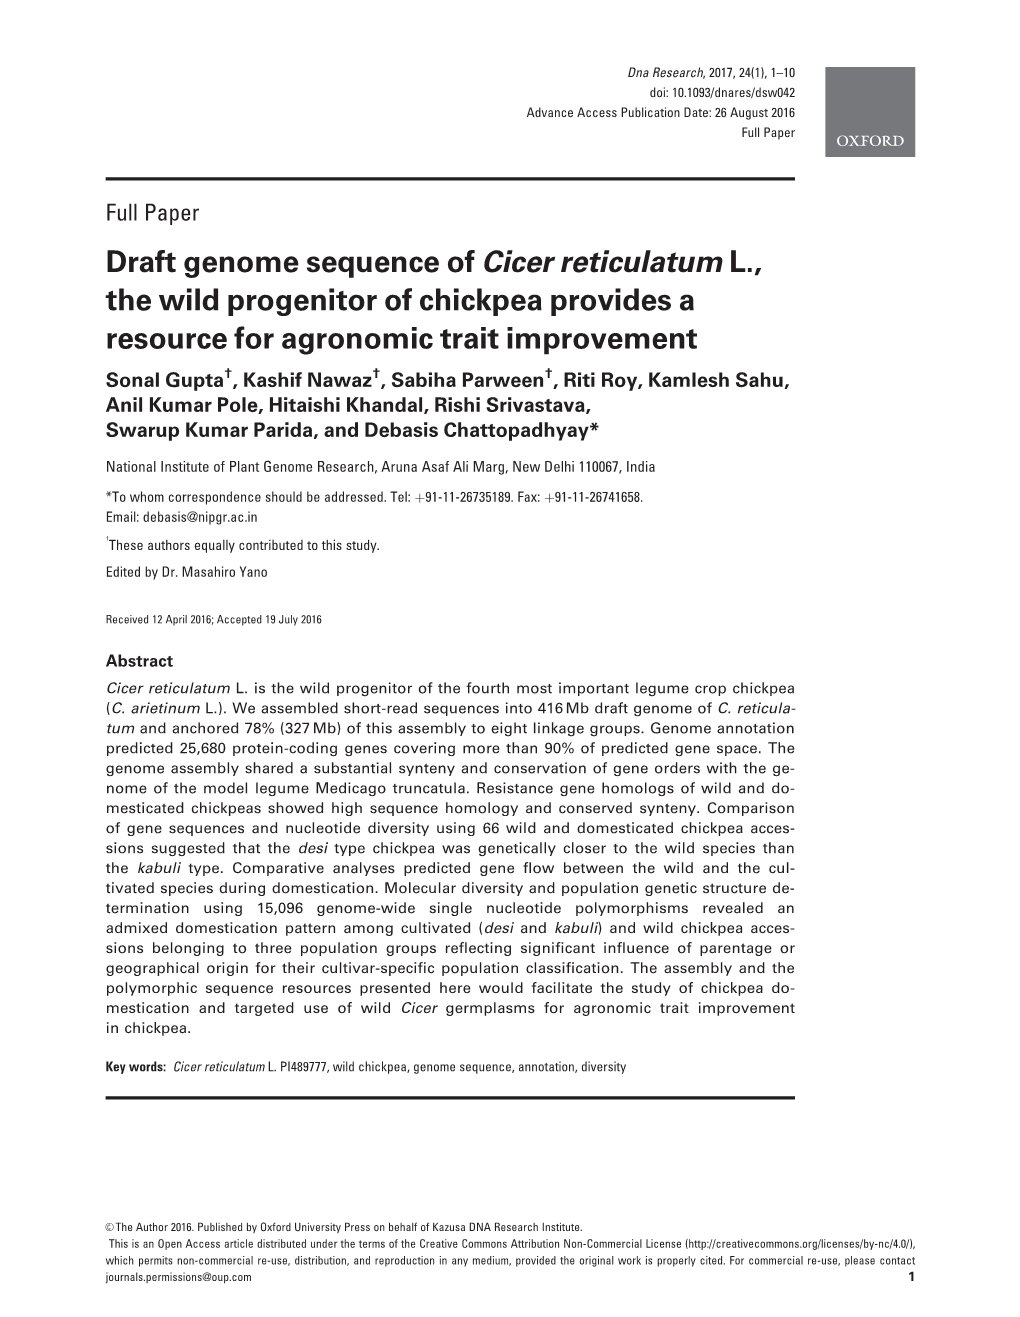 Draft Genome Sequence of Cicer Reticulatum L., the Wild Progenitor Of